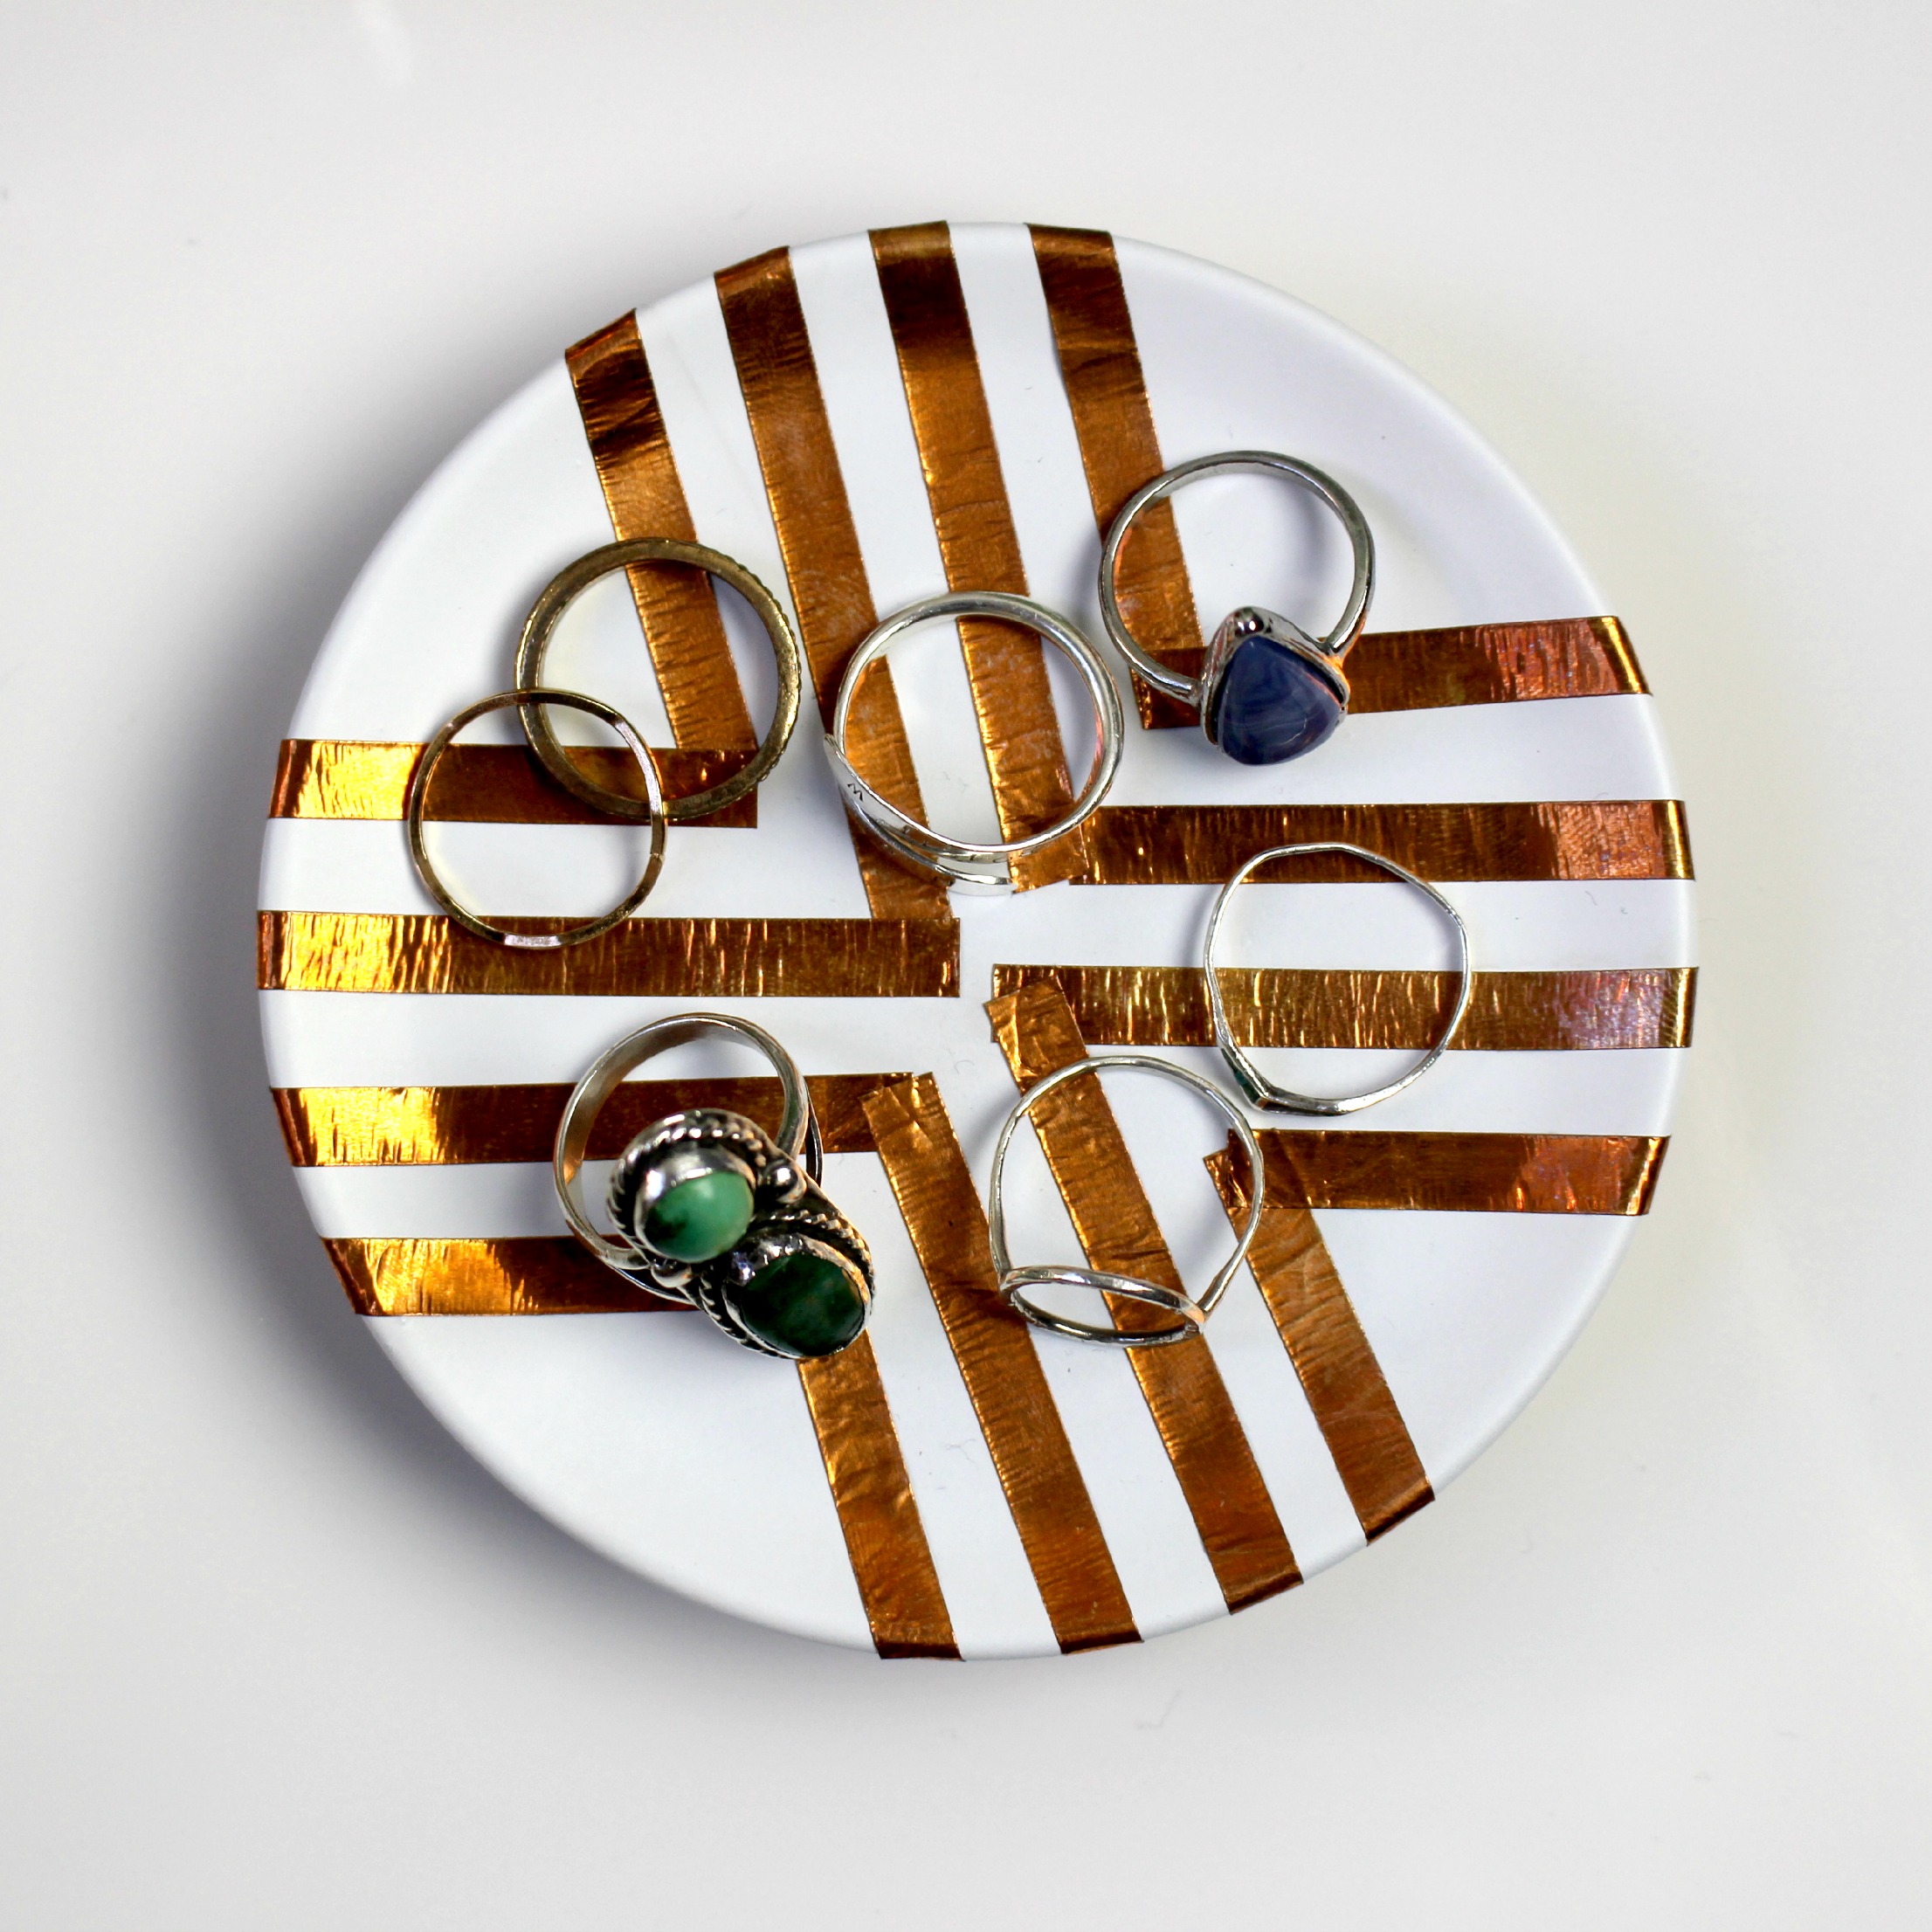 Easy DIY Ring Dish by Twinspiration at https://twinspiration.co/diy-ring-dish/